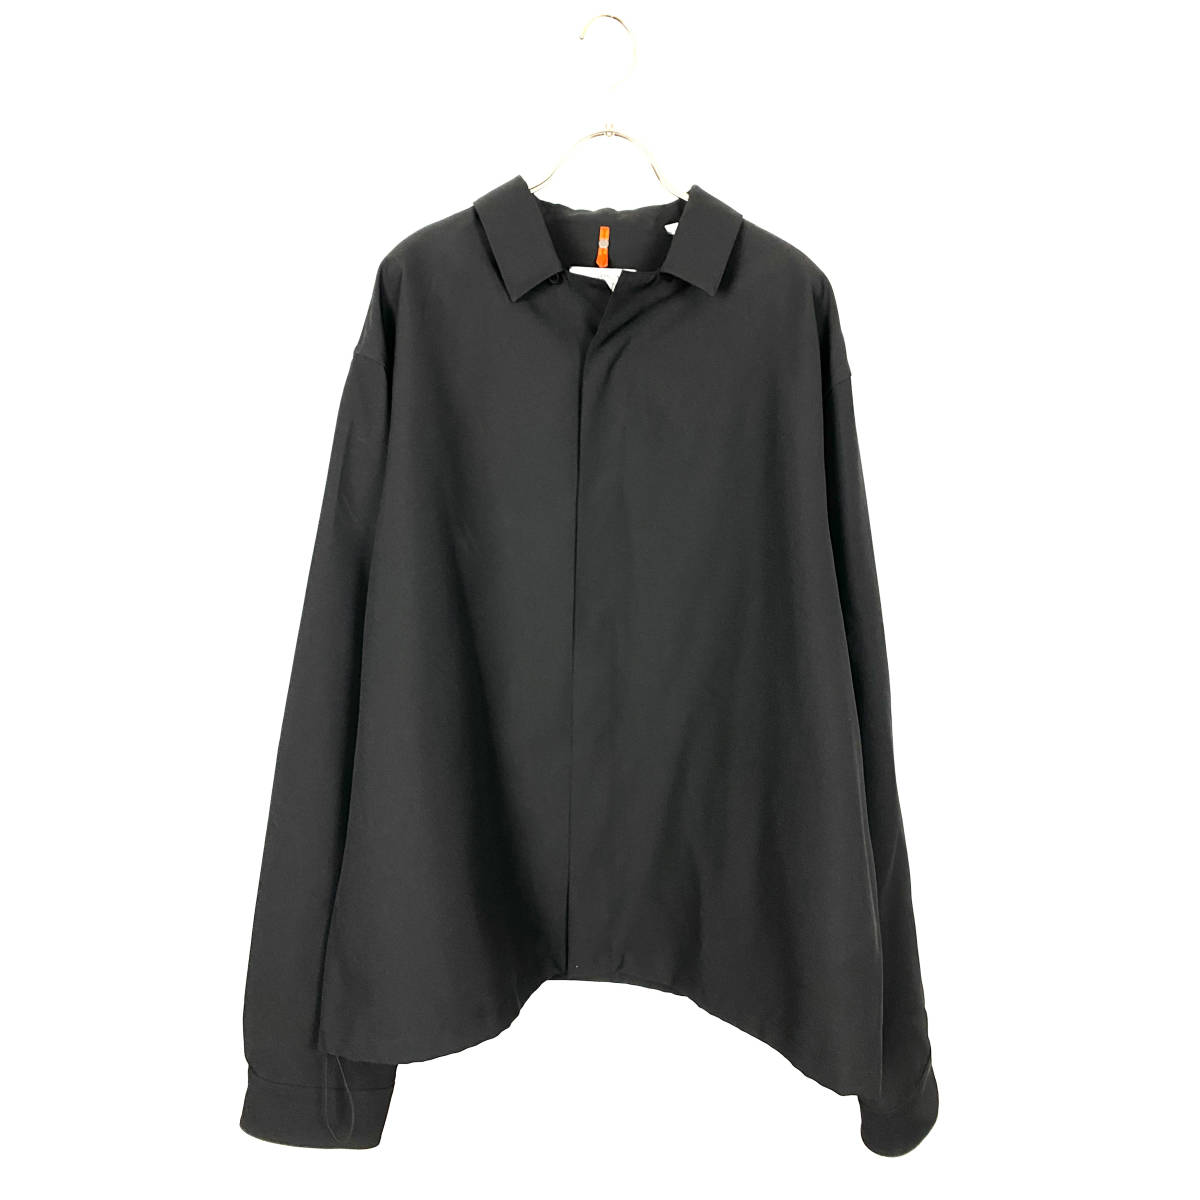 OAMC(OVER ALL MASTER CLOTH) SHIRTS JACKET 18SS (black)